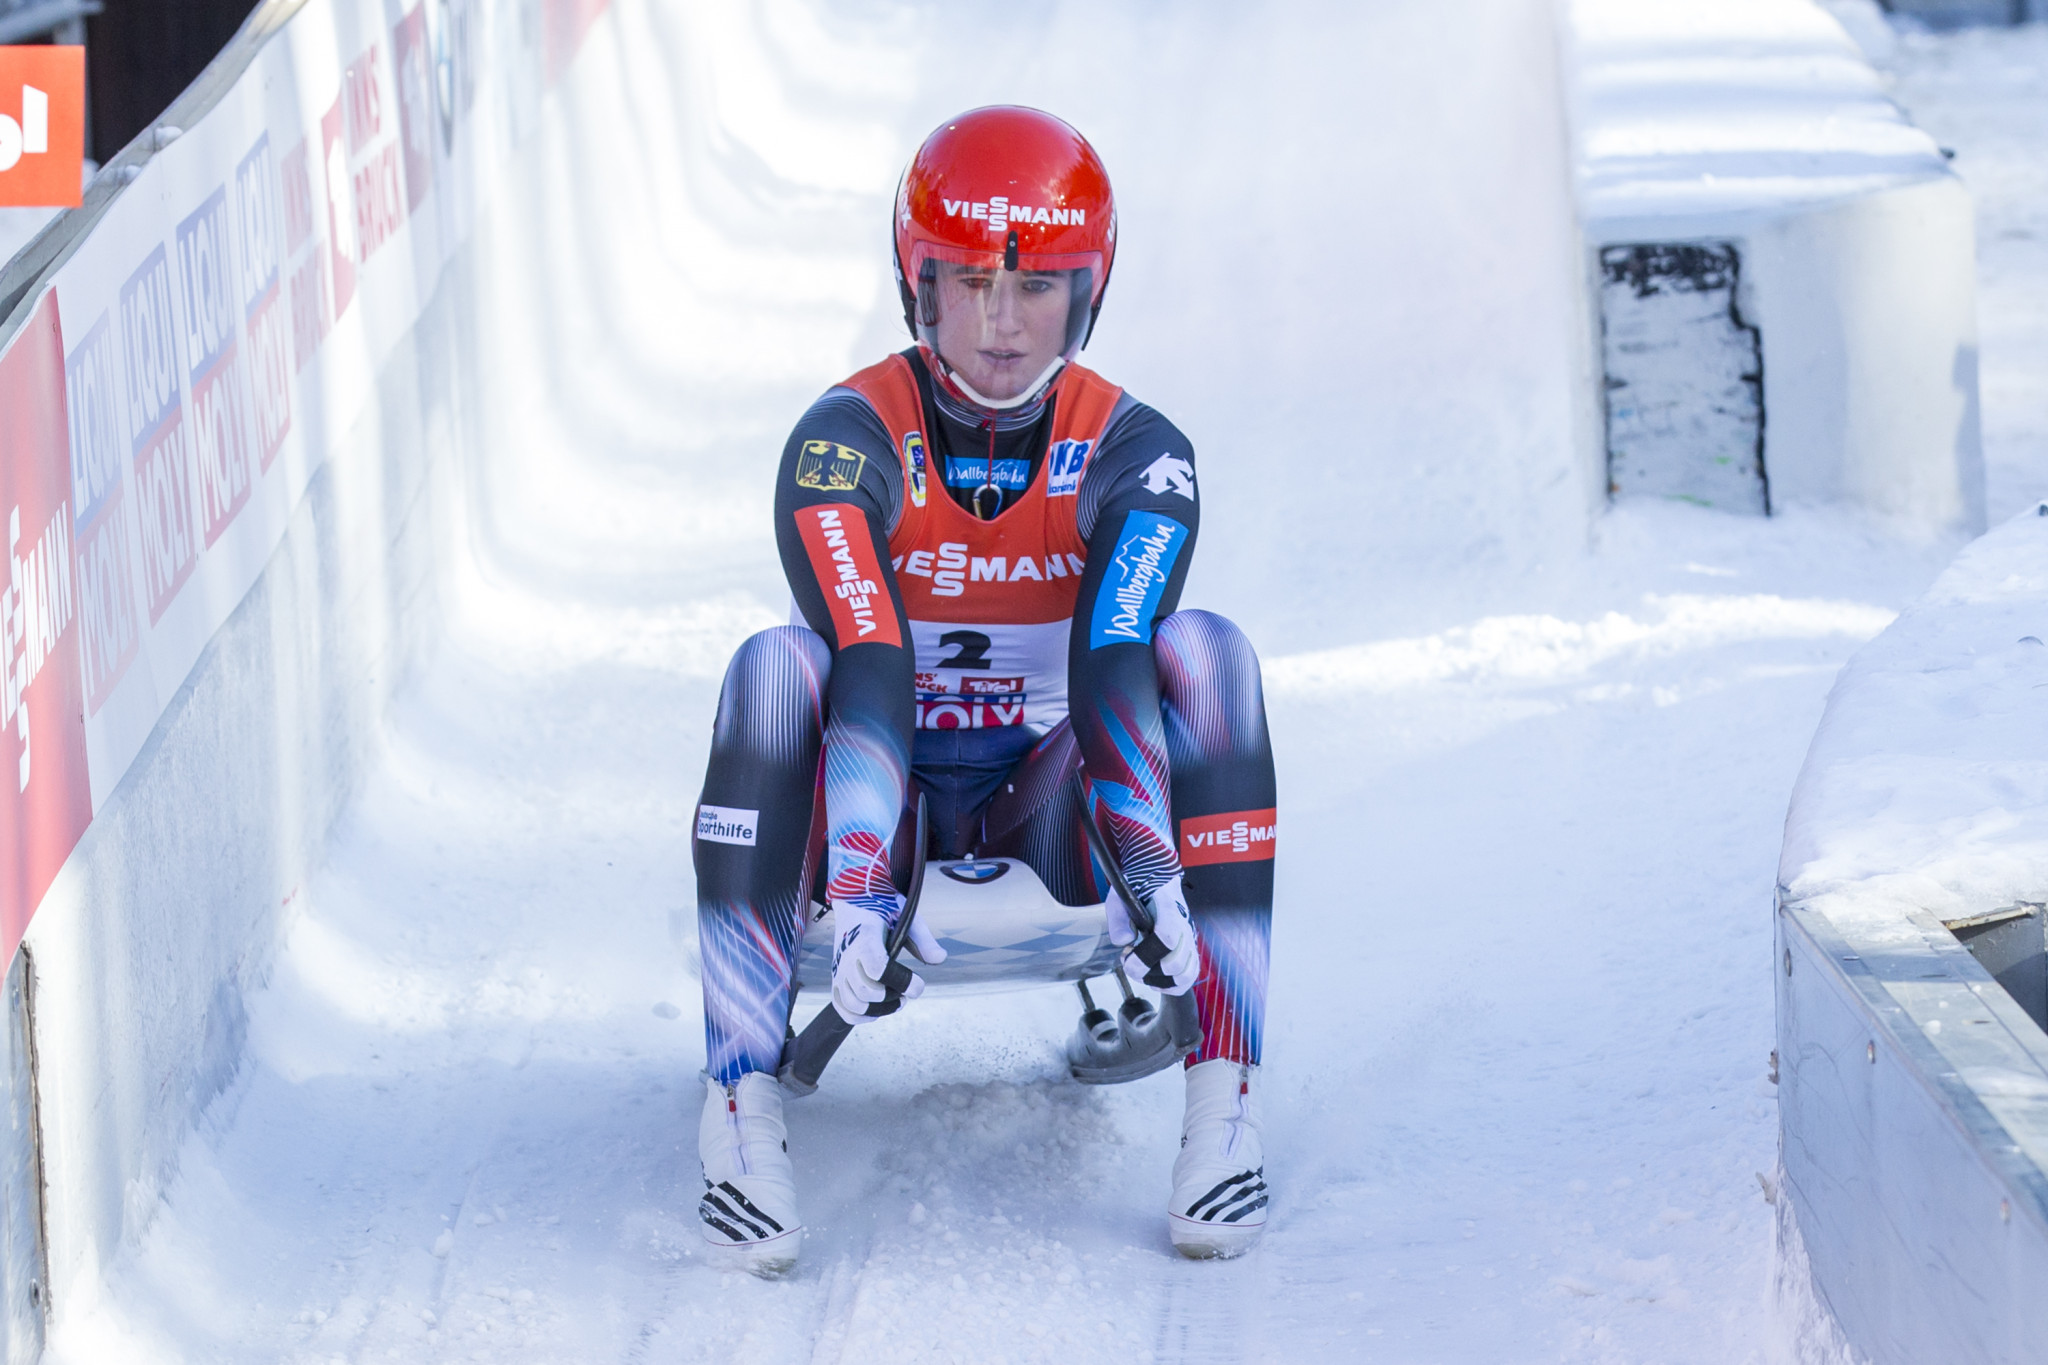 German dominance expected again on eve of Luge World Cup season